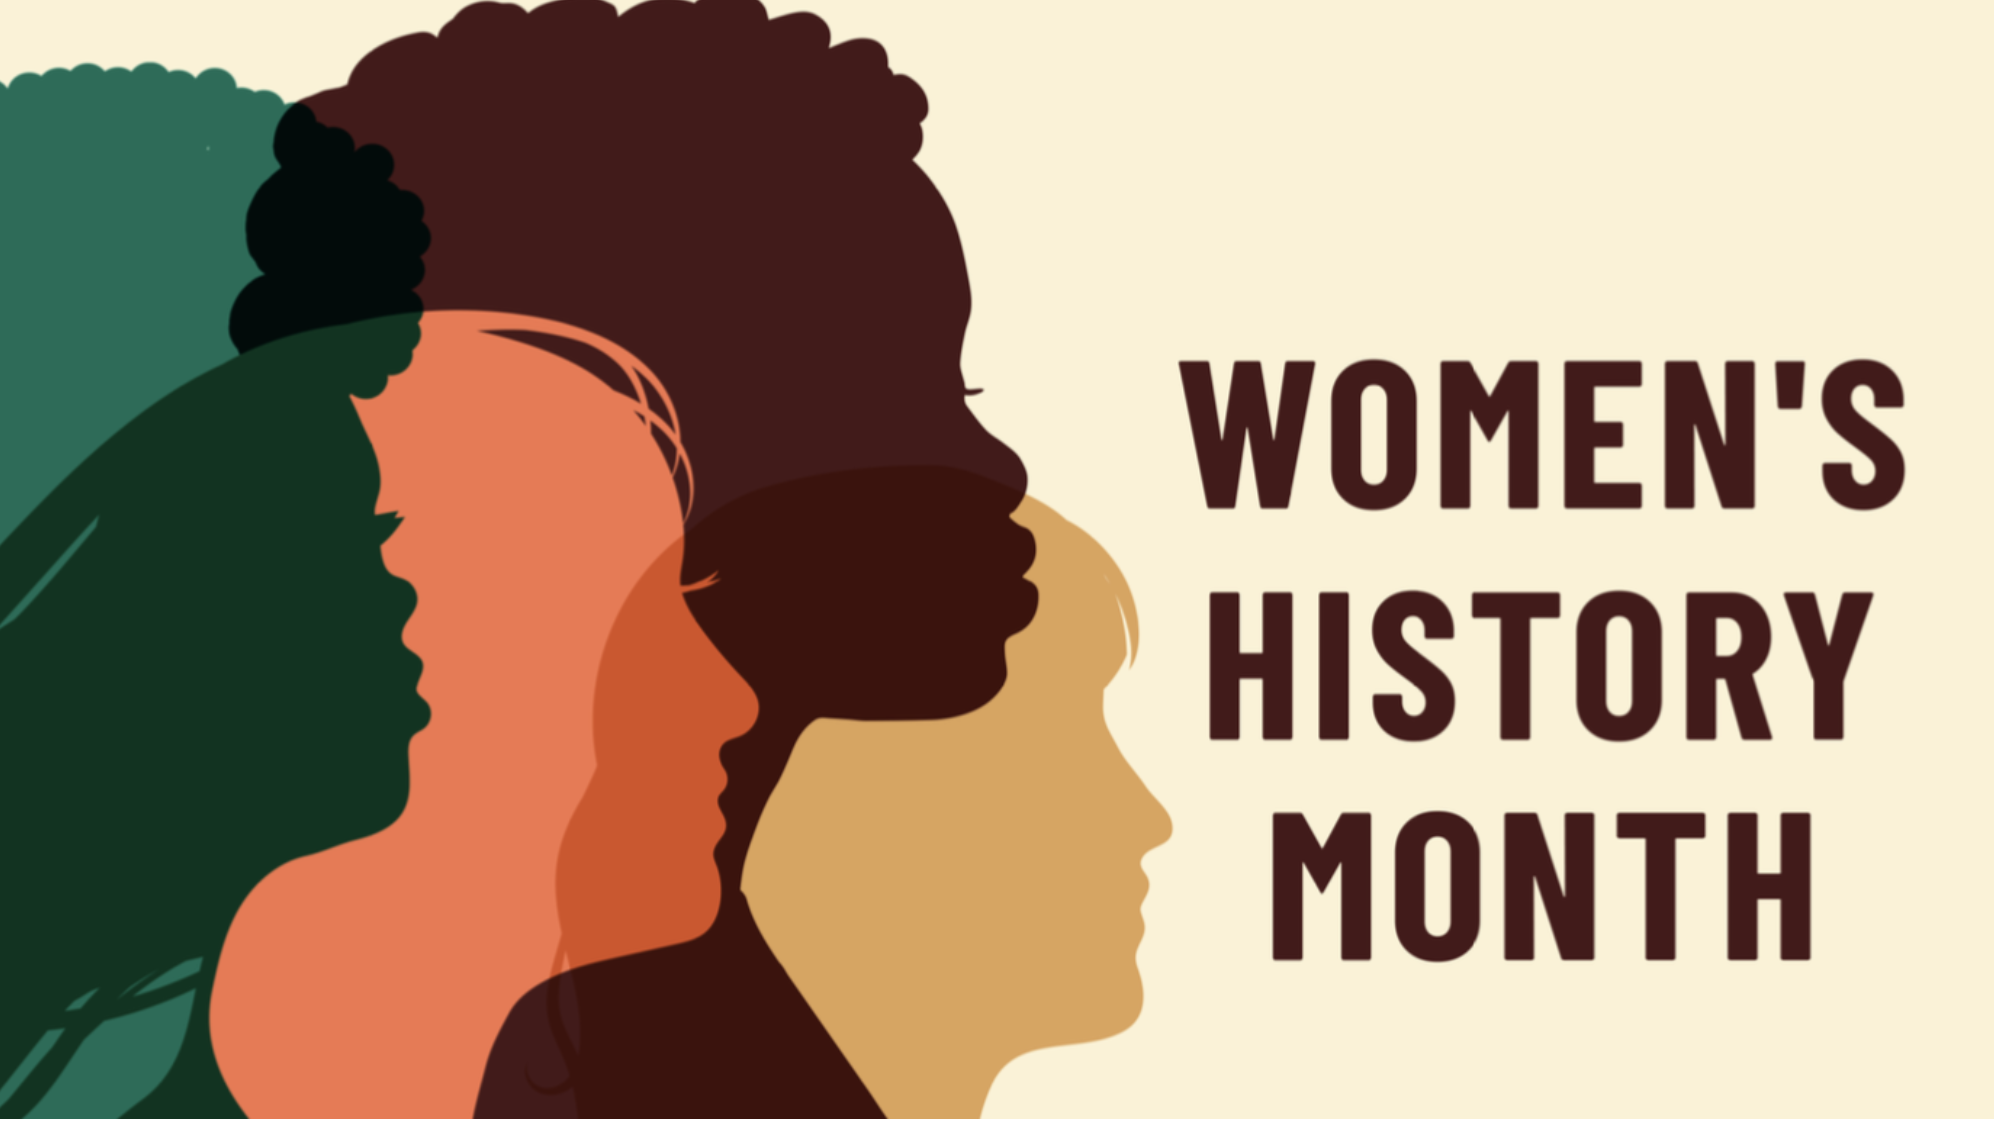 Women’s History Month Reference News